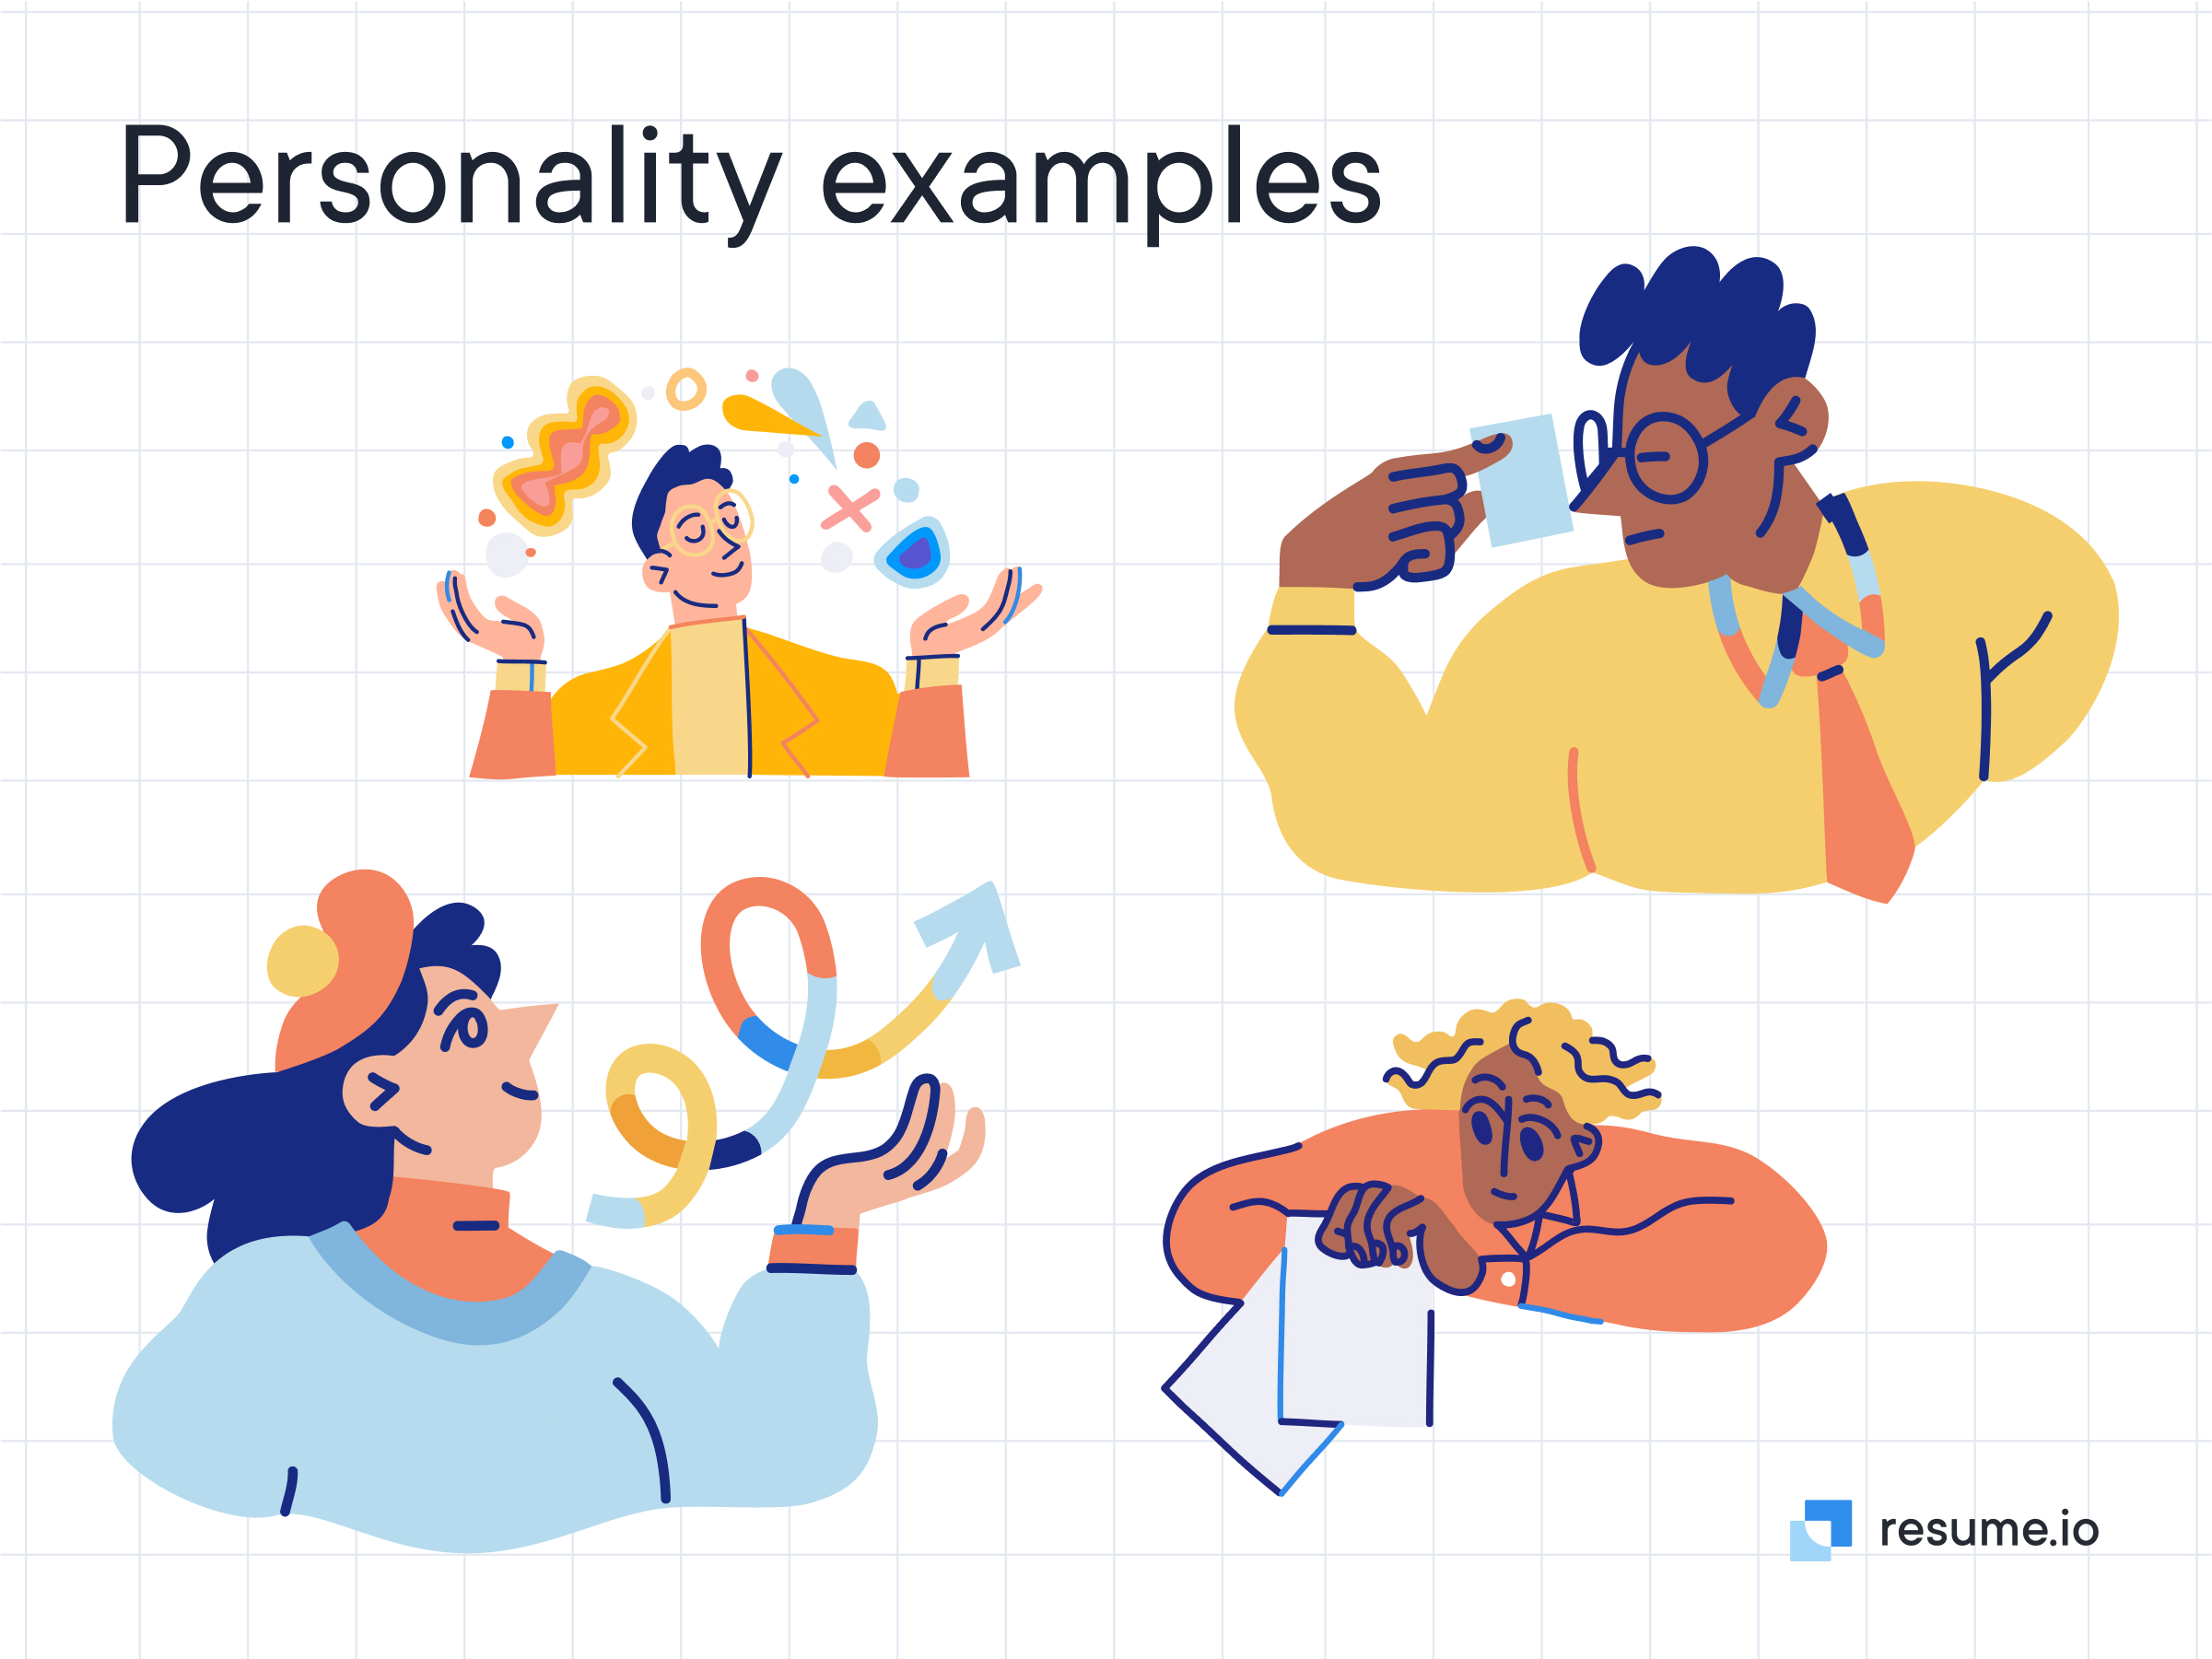 Four examples of personalities